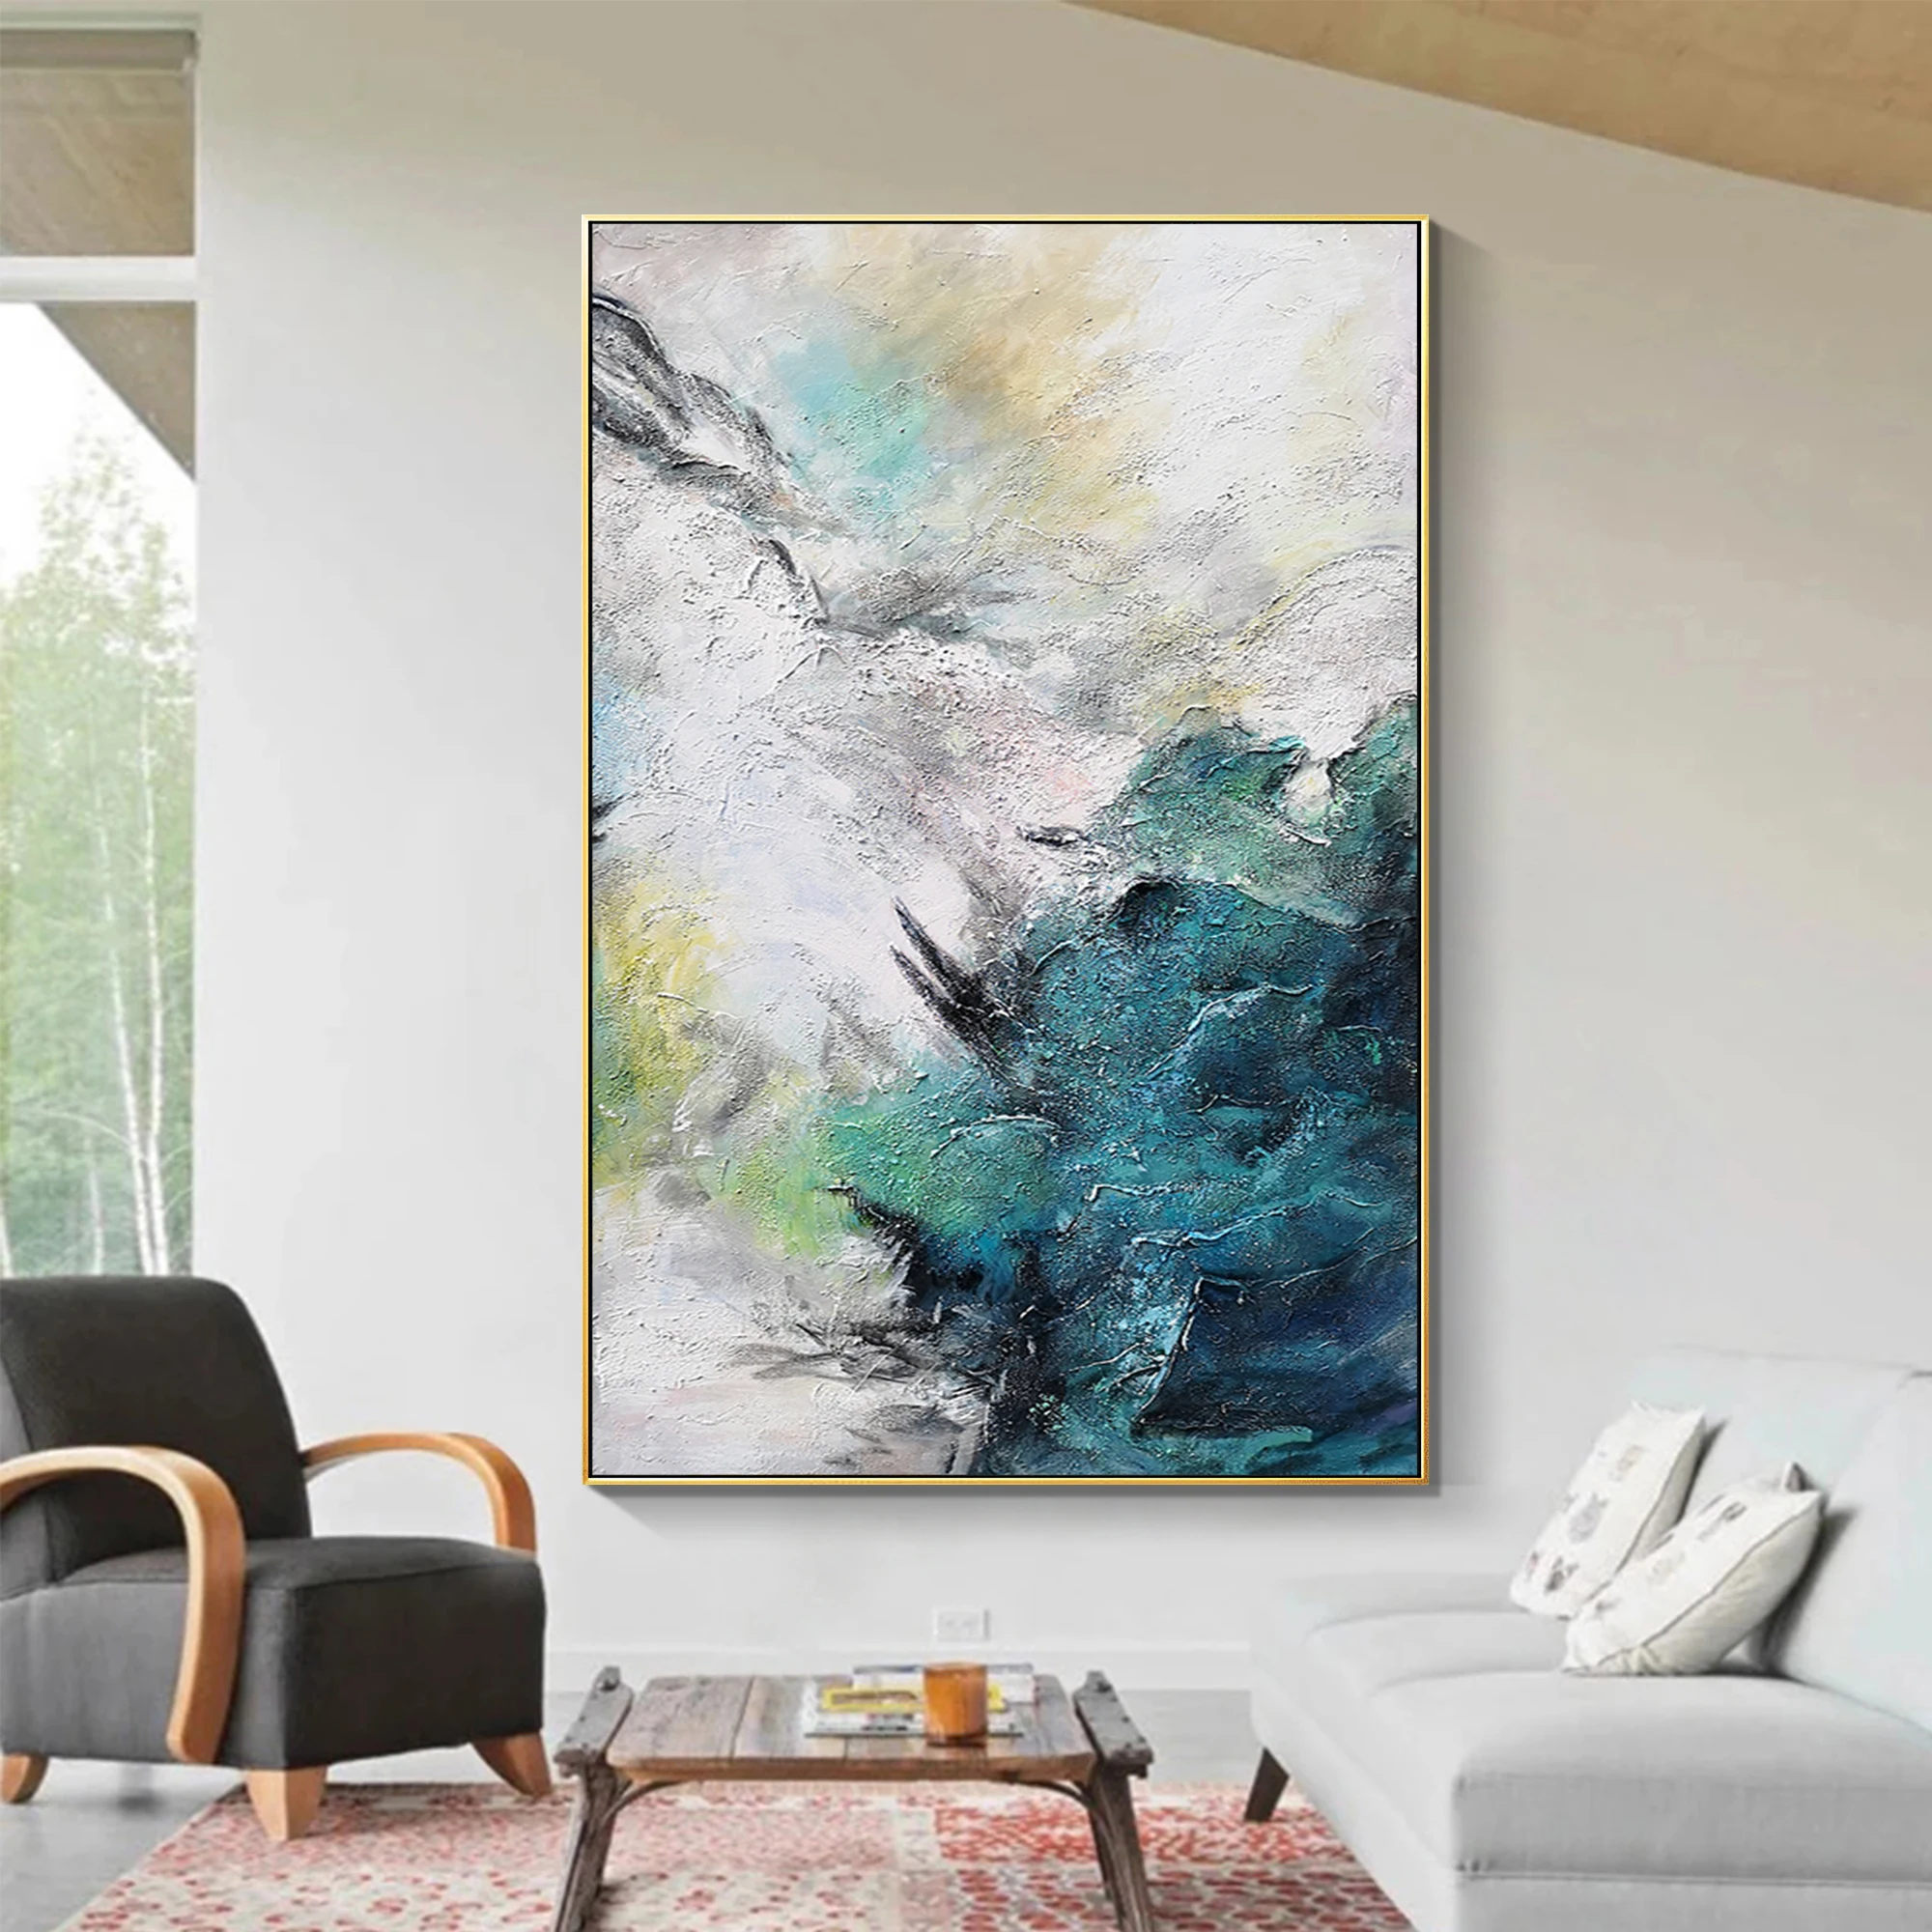 

Hand Painted Teal White Acrylic Abstract Palette Knife Textured Painting On Canvas Large Wall Art Modern Living Room Wall Decor